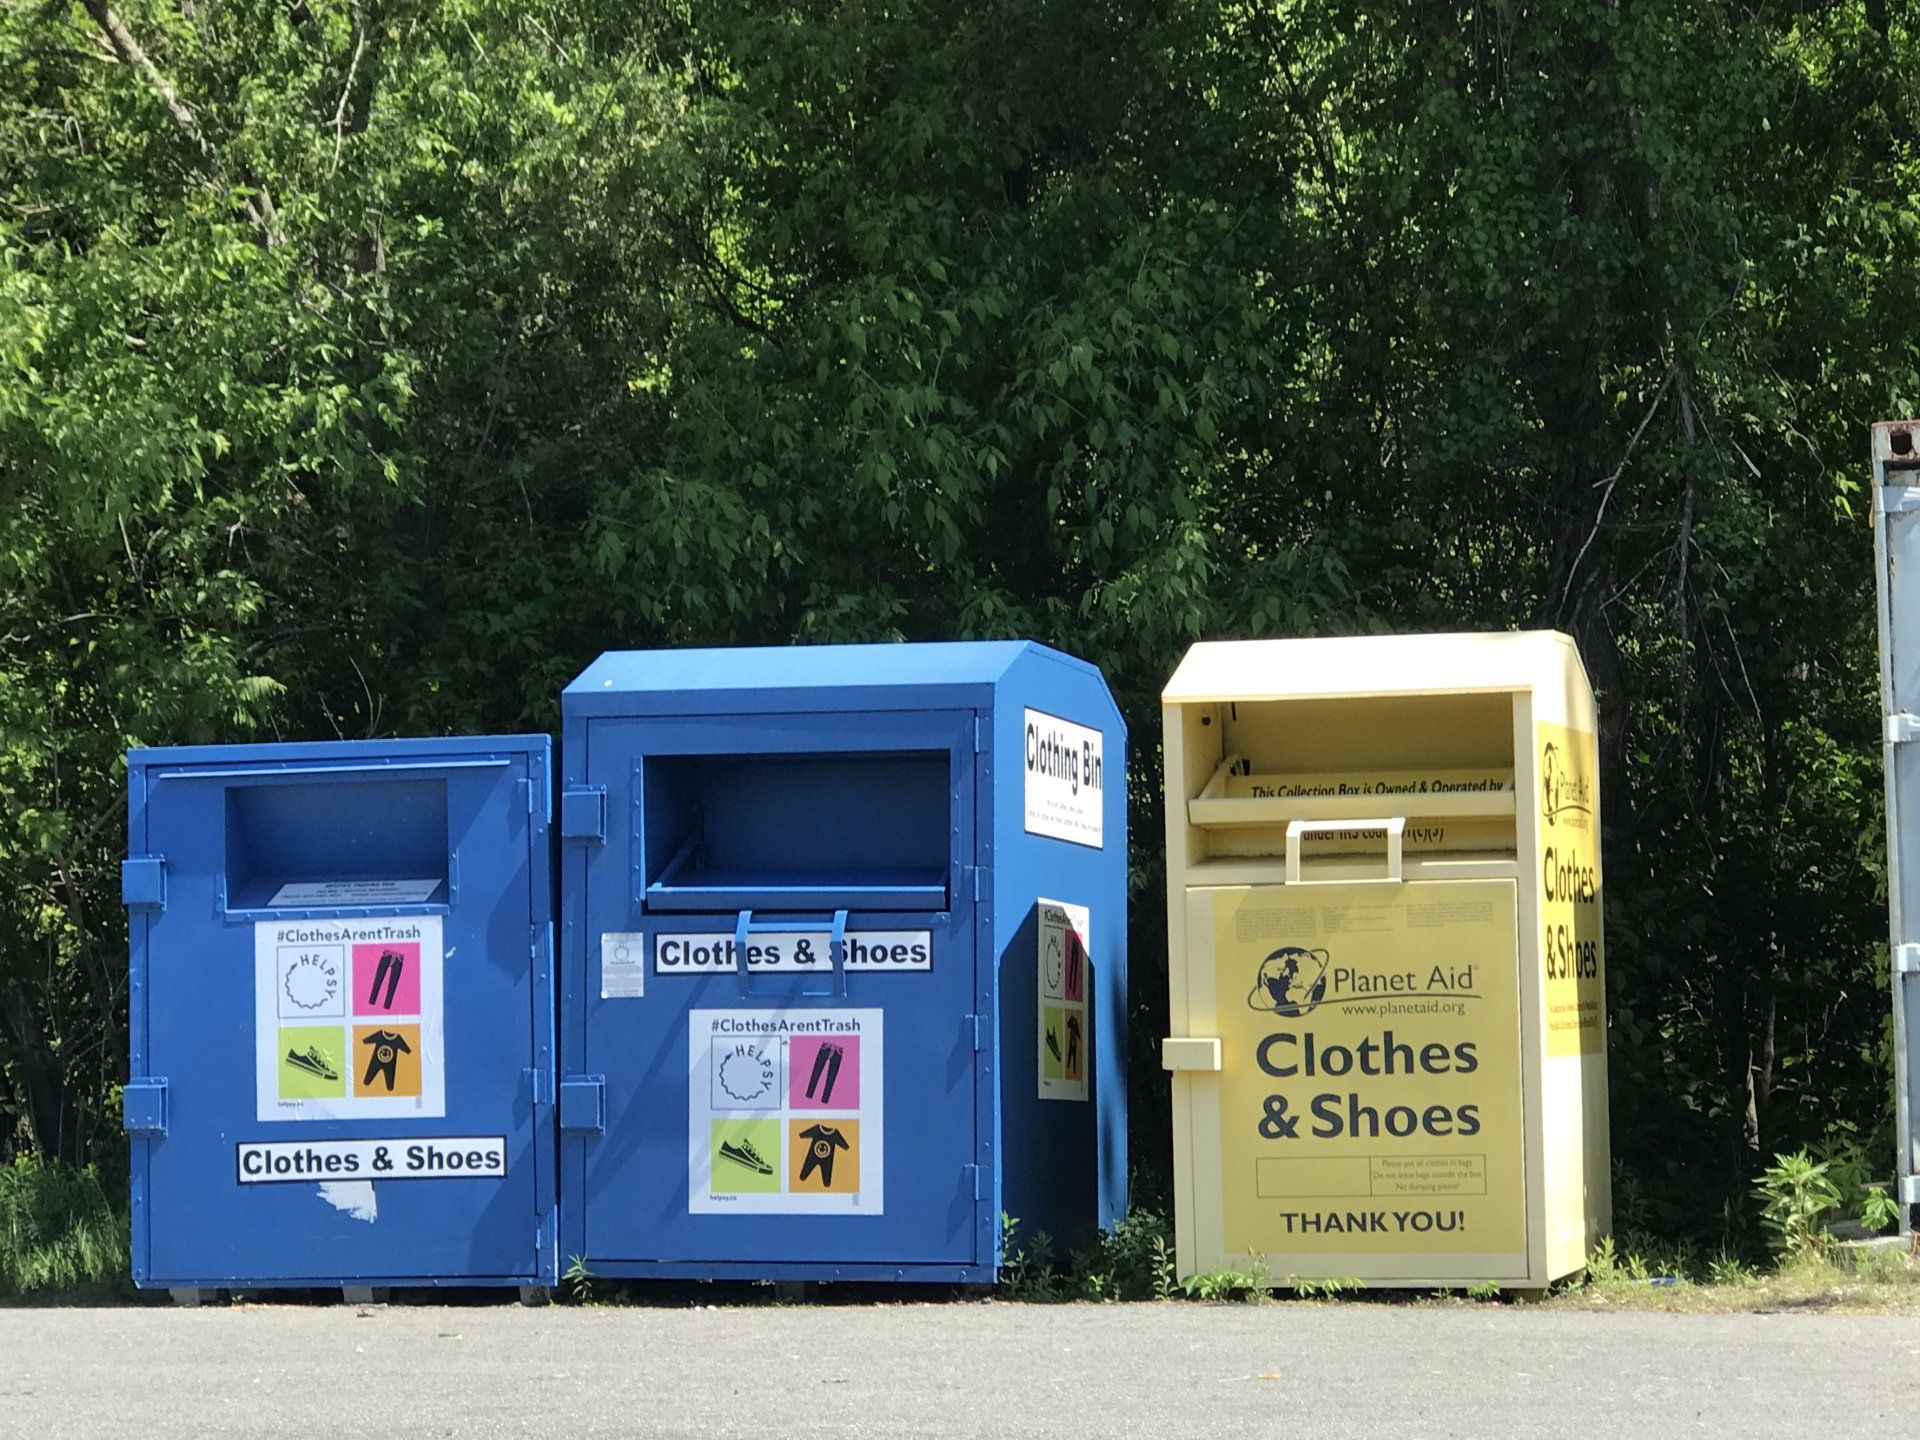 Two large blue donation bins and a large yellow donation bin from Planet Aid